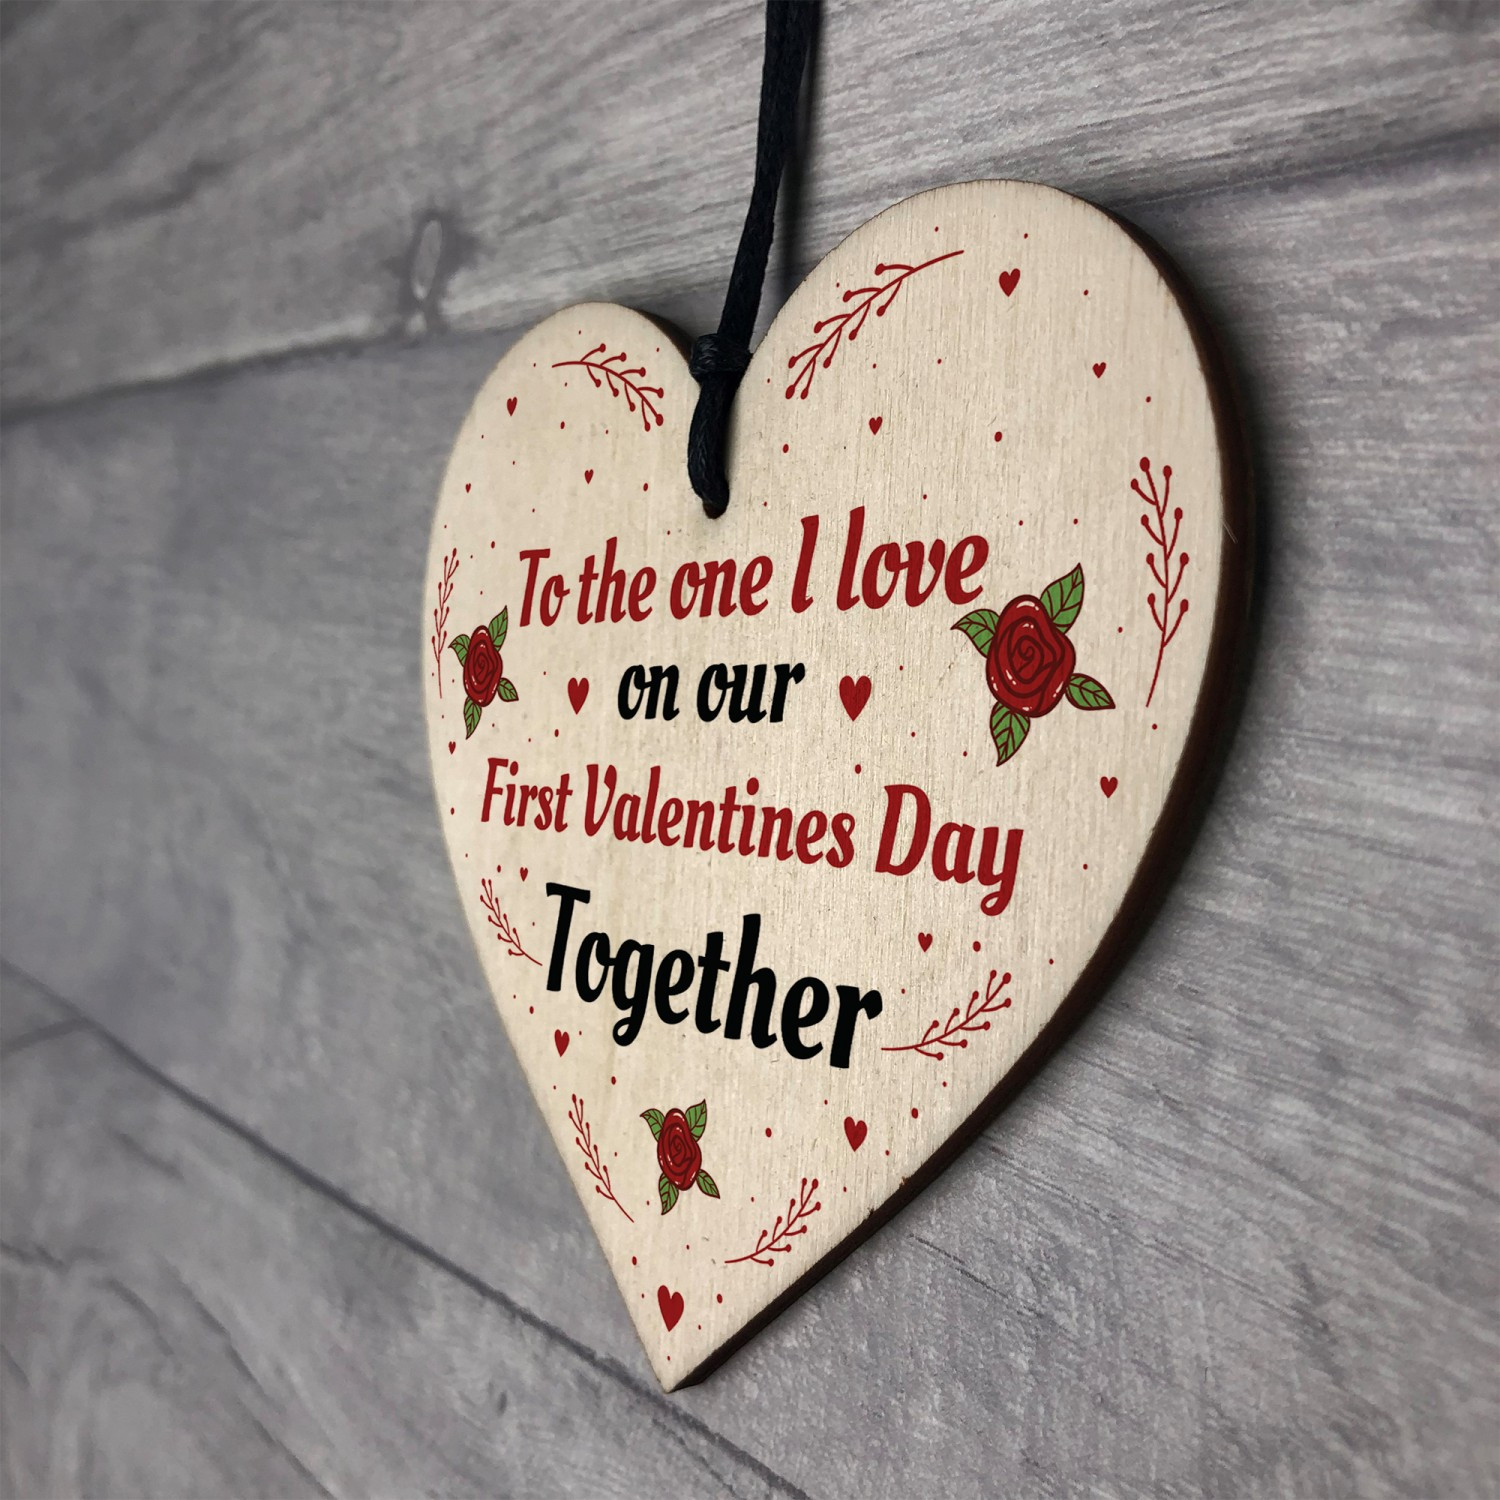 First Valentines Day Gift Inspirational Handmade First Valentines Day to Her Boyfriend